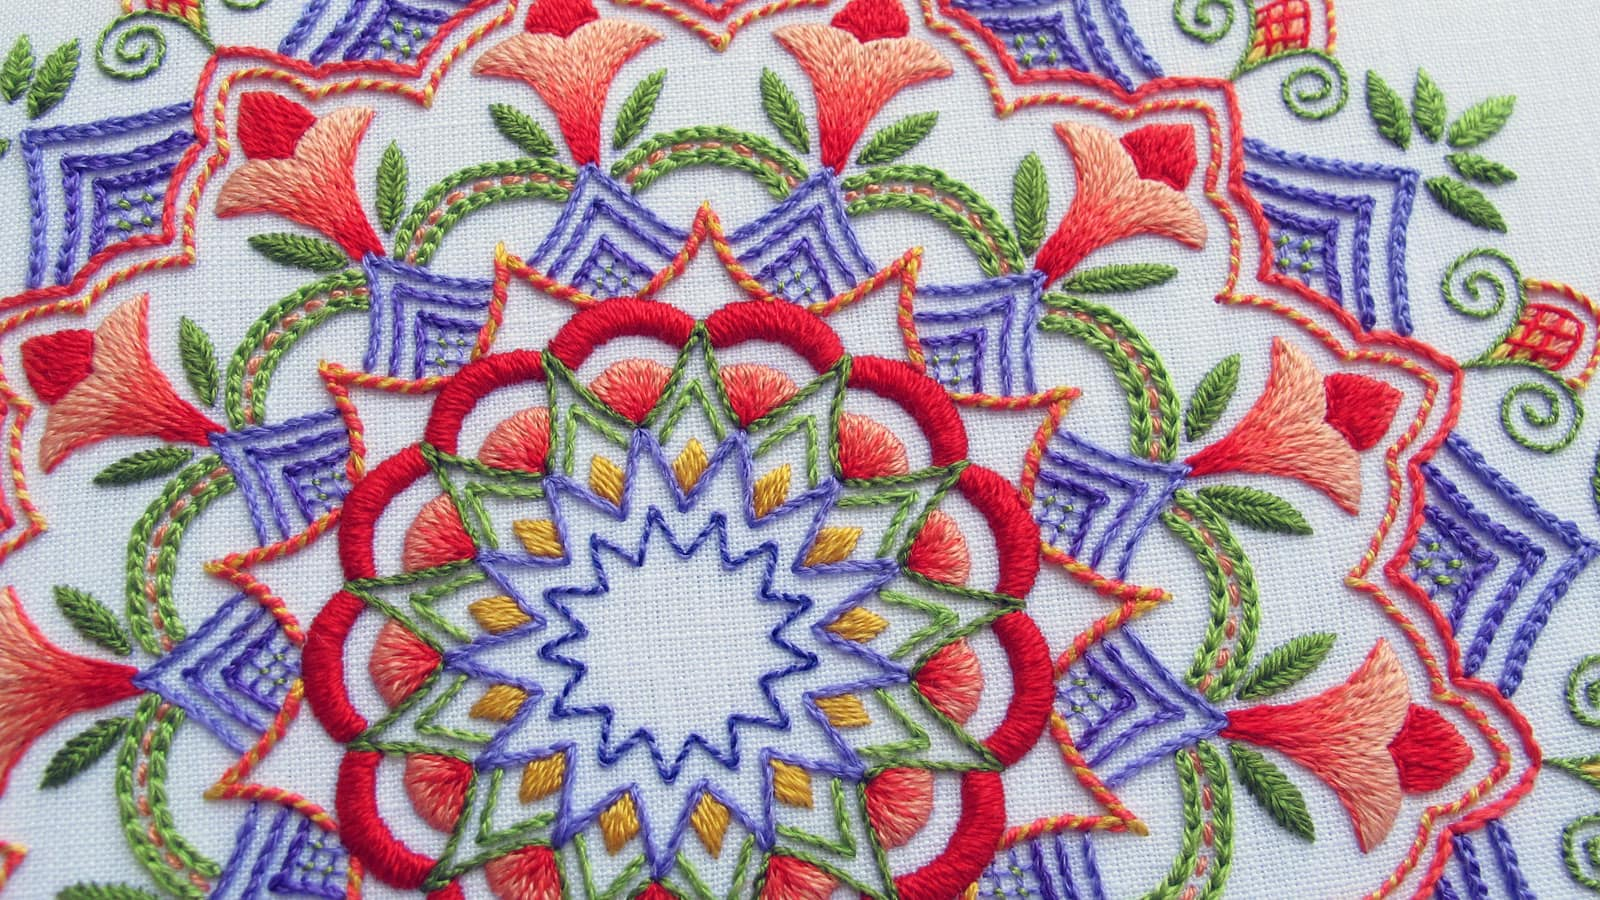 Free Crewel Embroidery Patterns Needlenthread Tips Tricks And Great Resources For Hand Embroidery